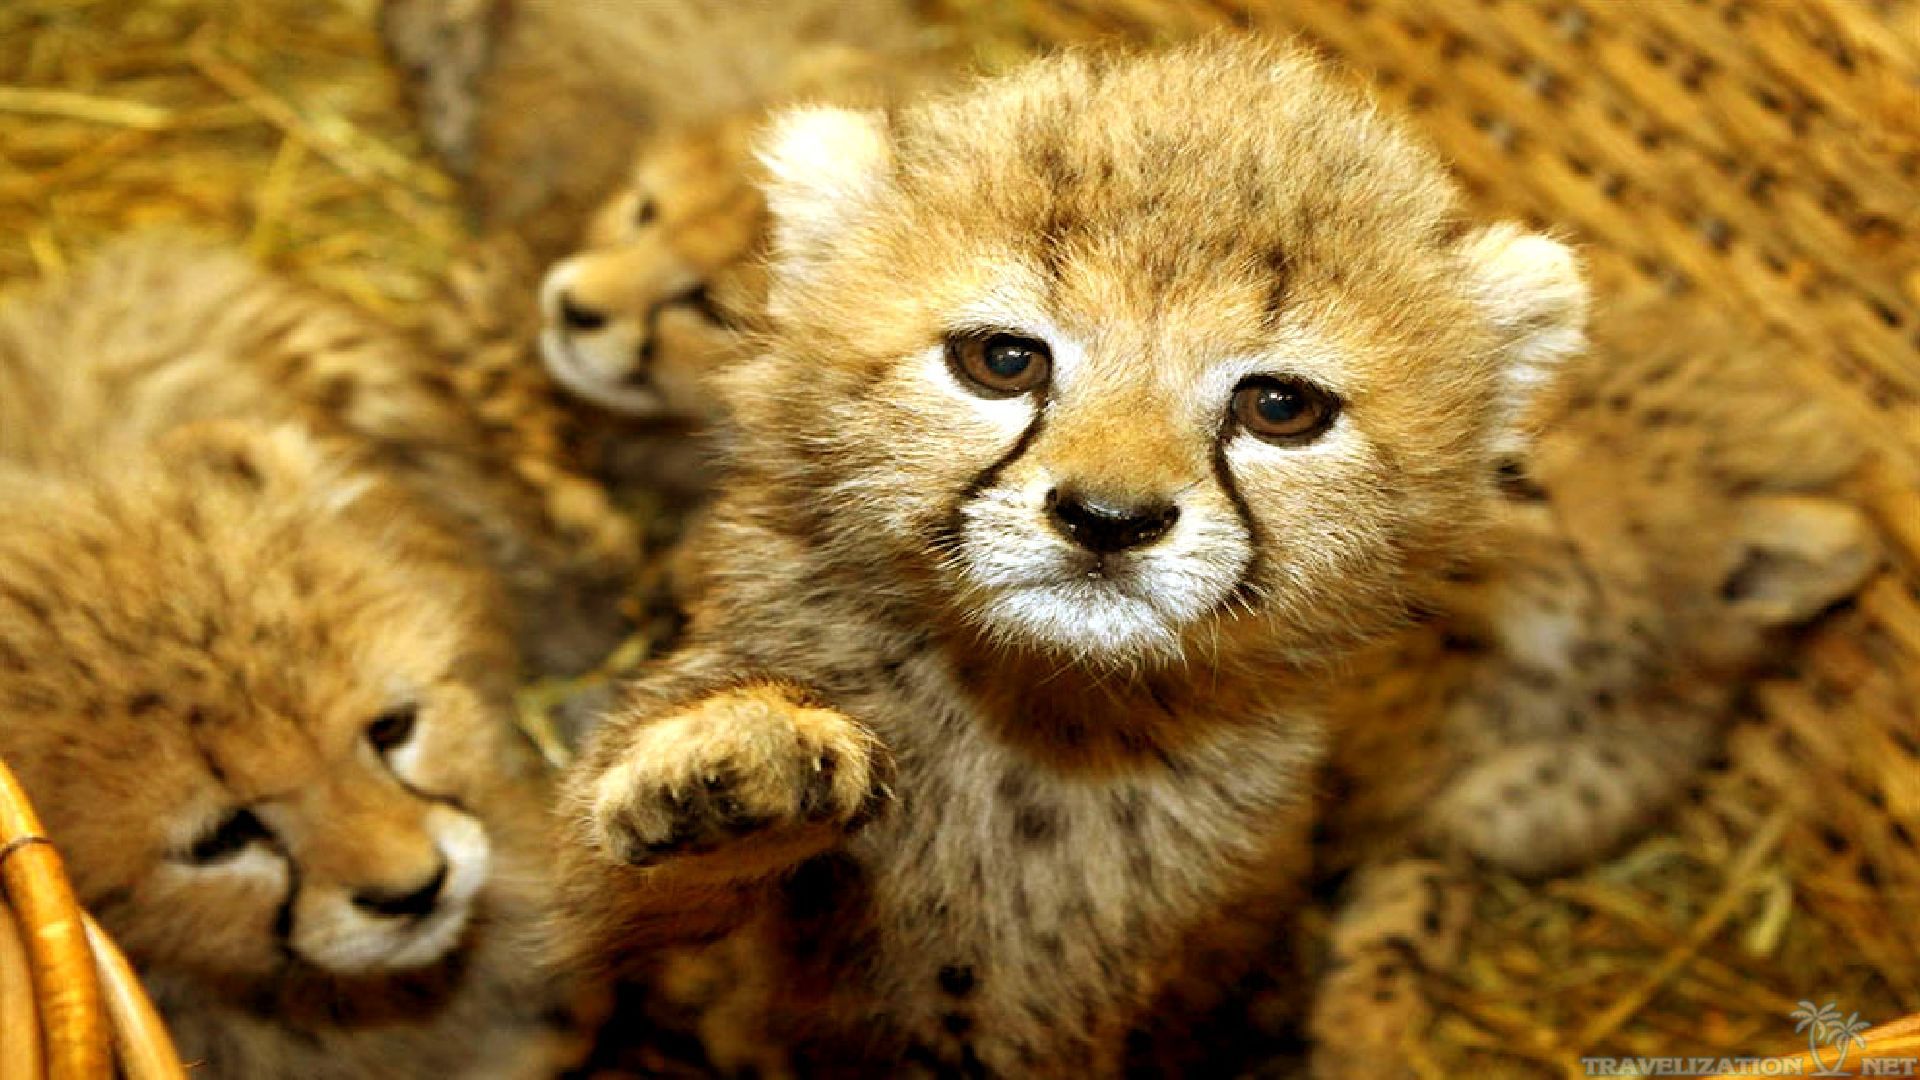 Baby Animals Cute Sweet Tiget Wallpaper With